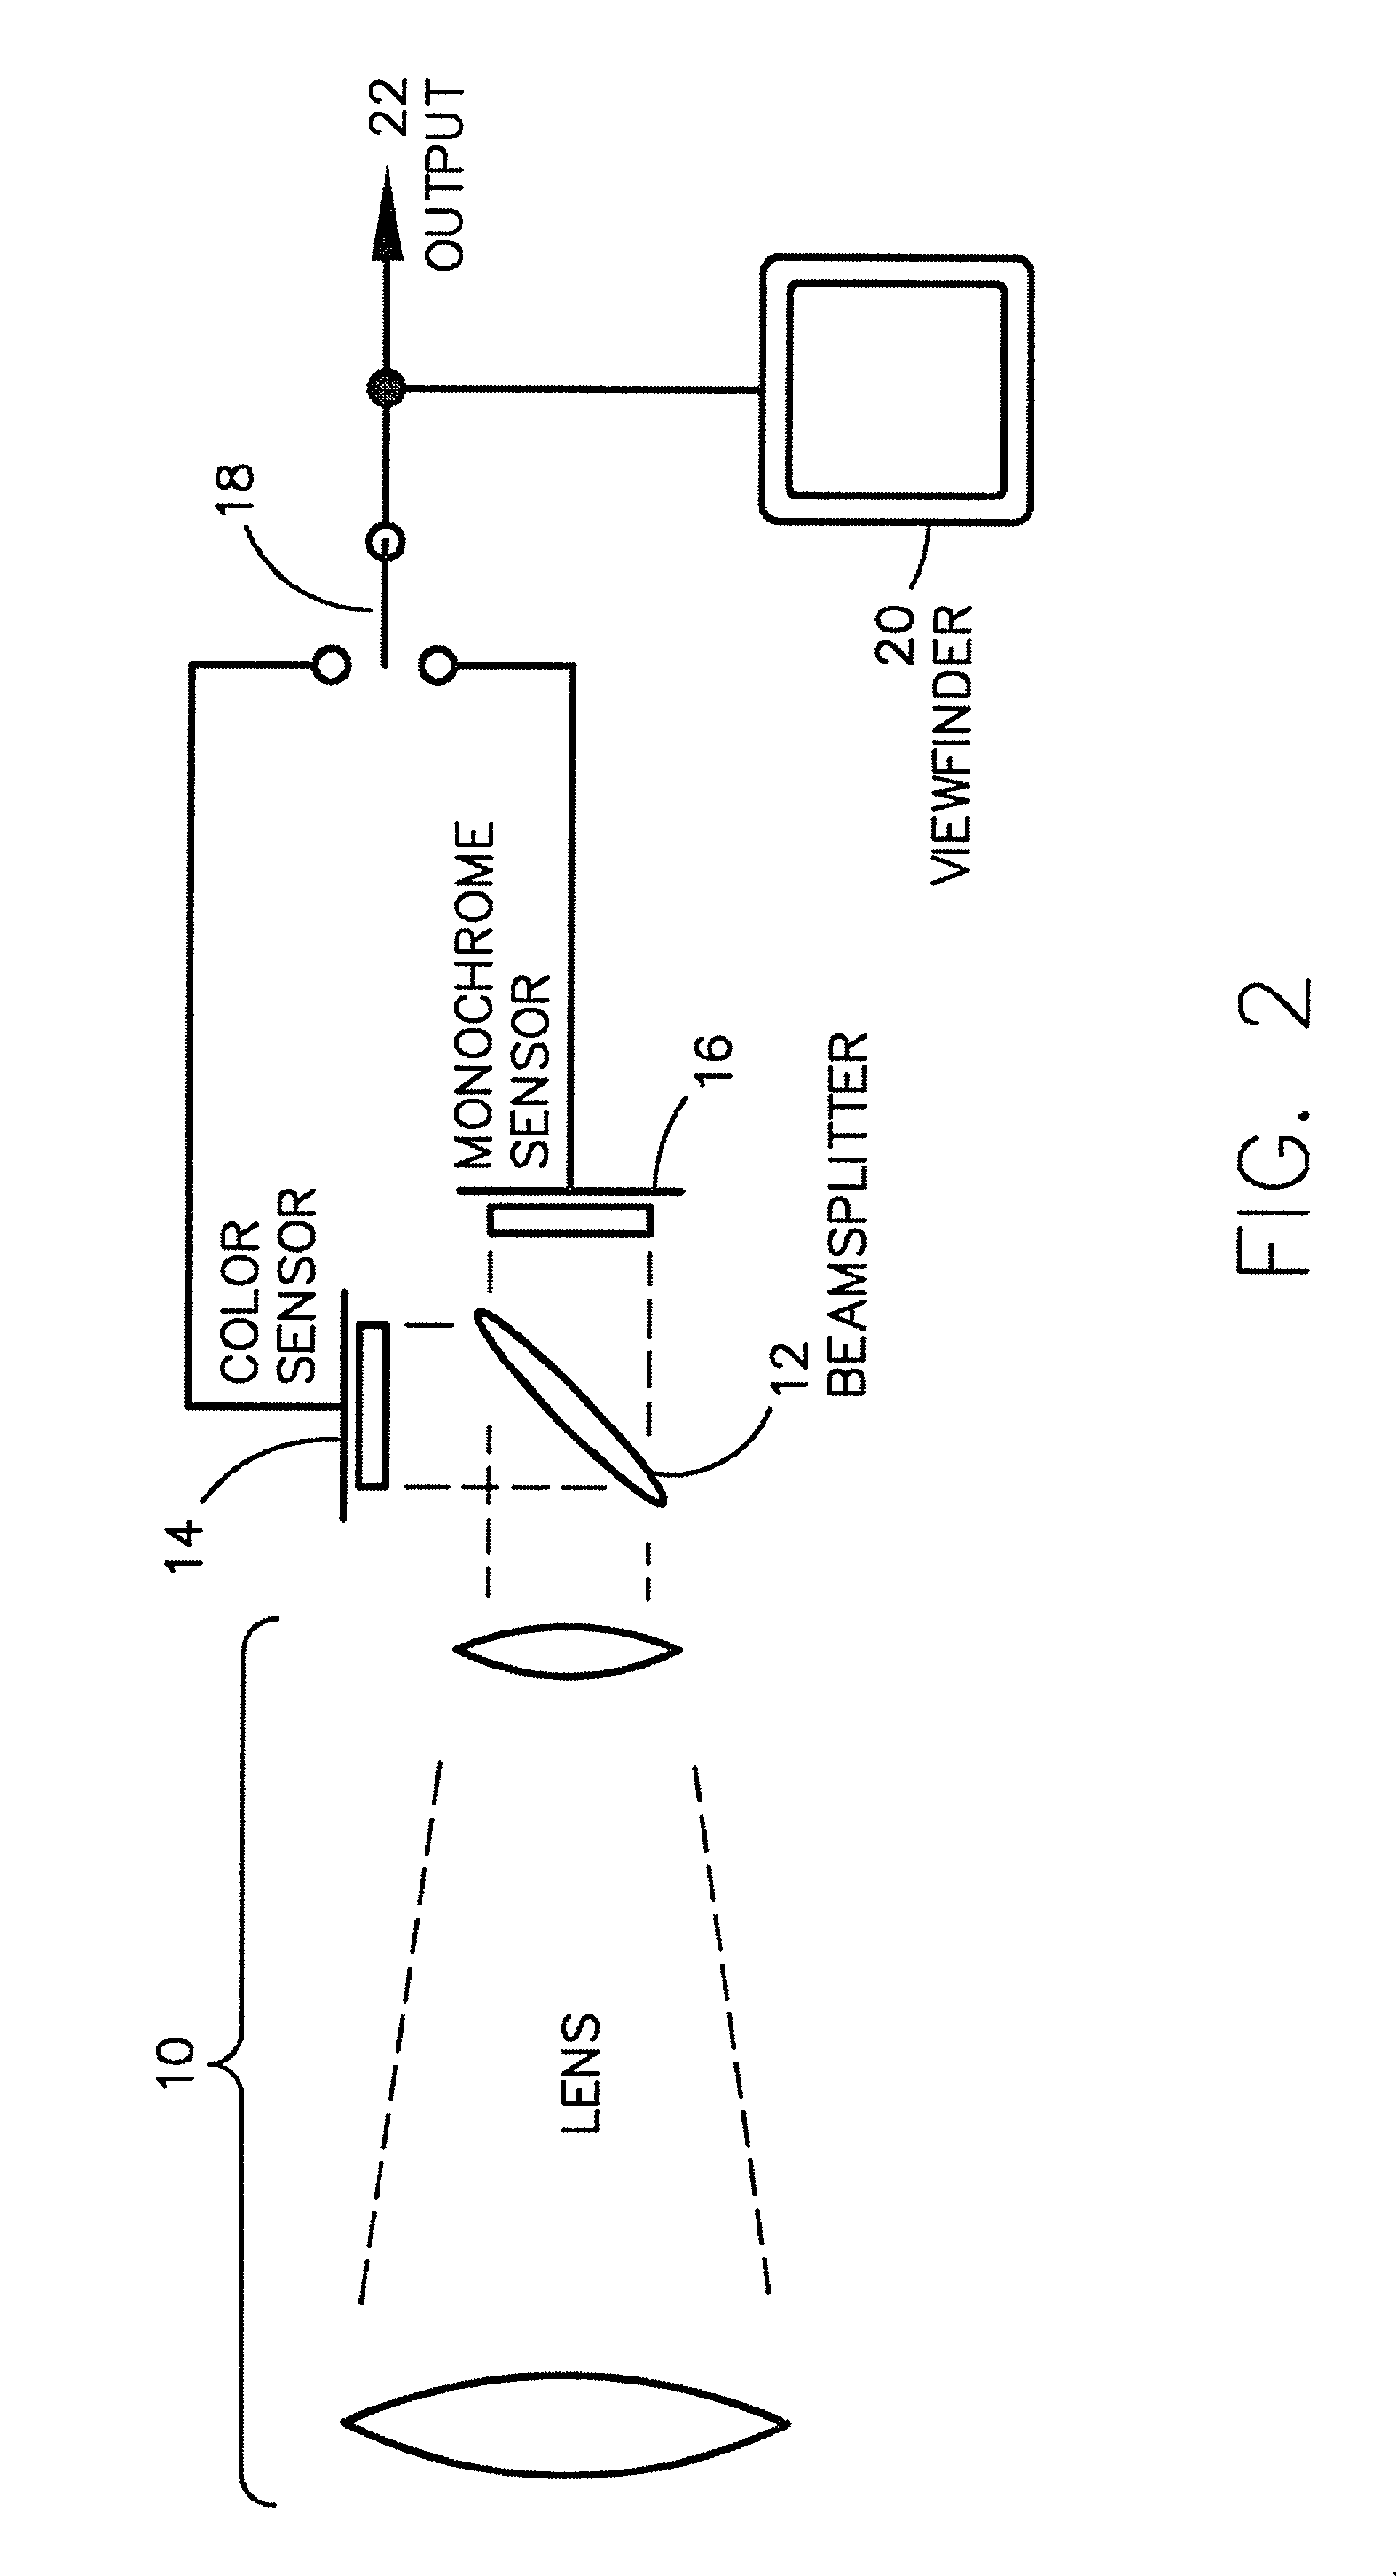 Dual-mode camera system for day/night or variable zoom operation